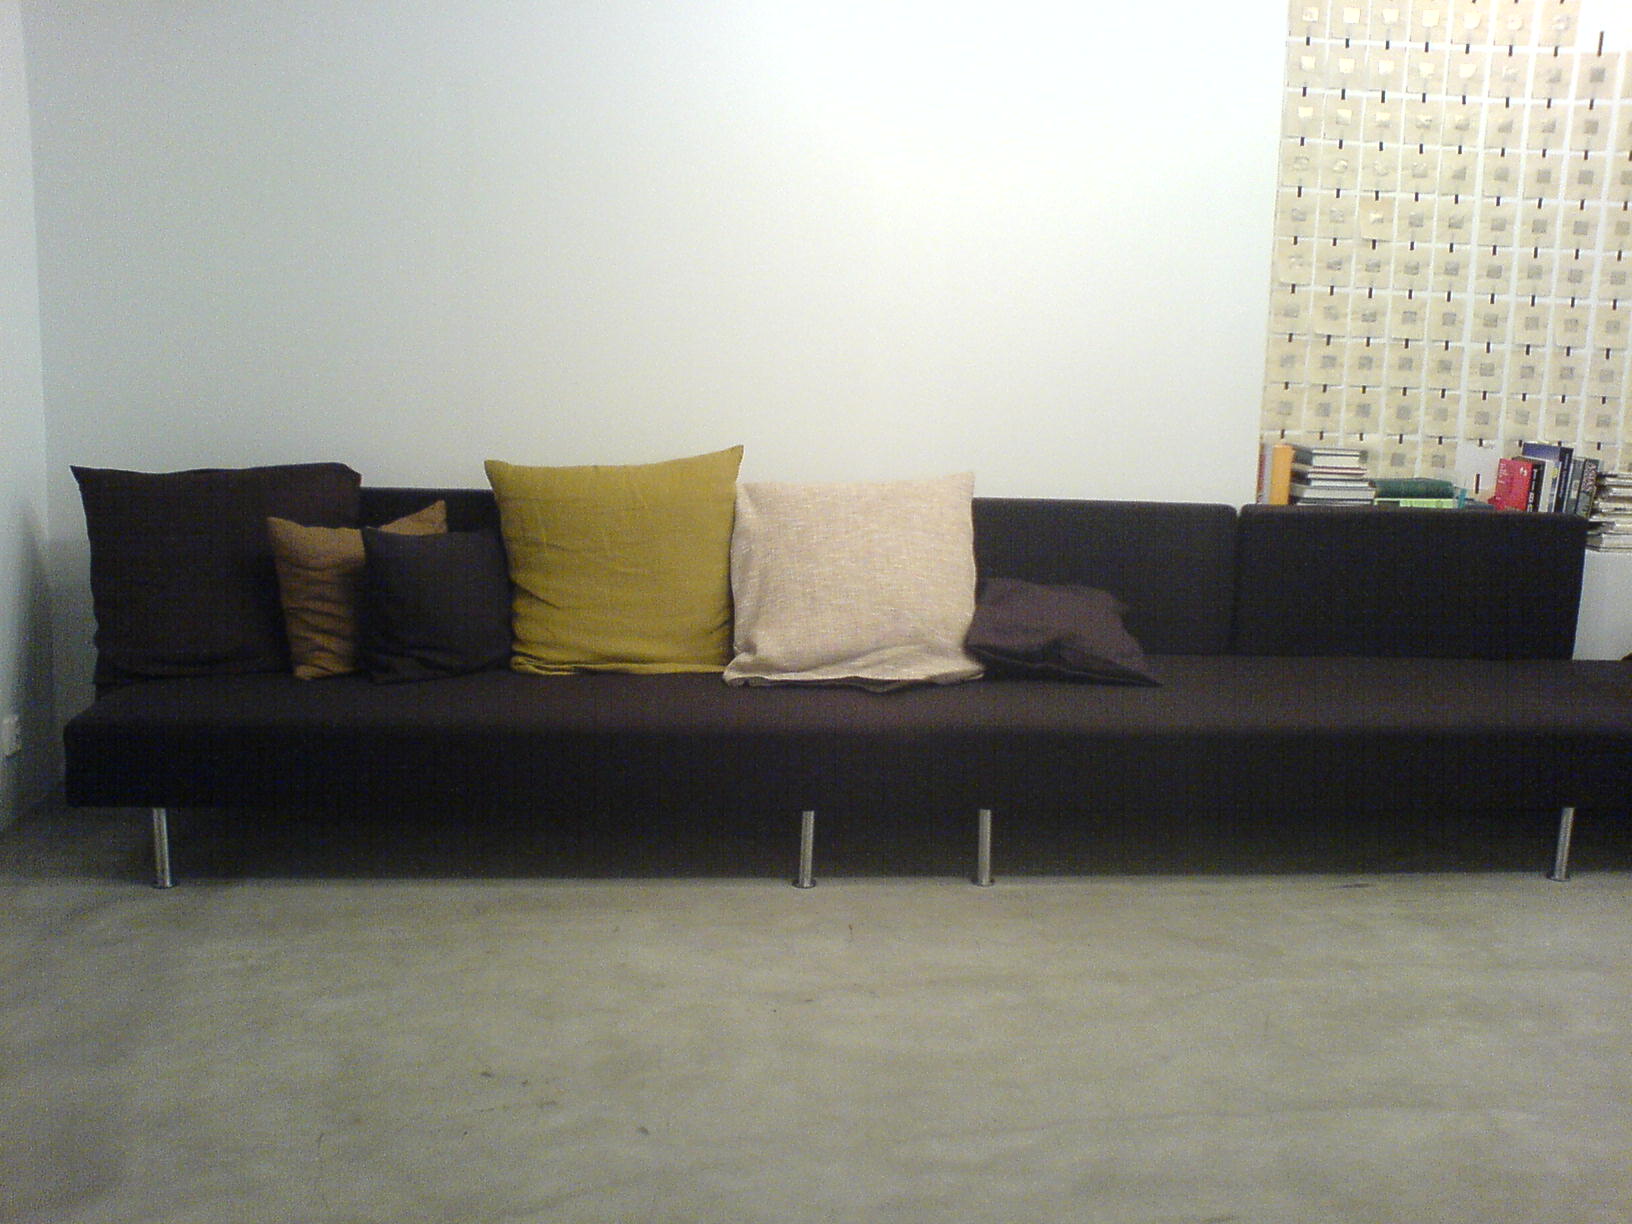 a large couch has several different color pillows